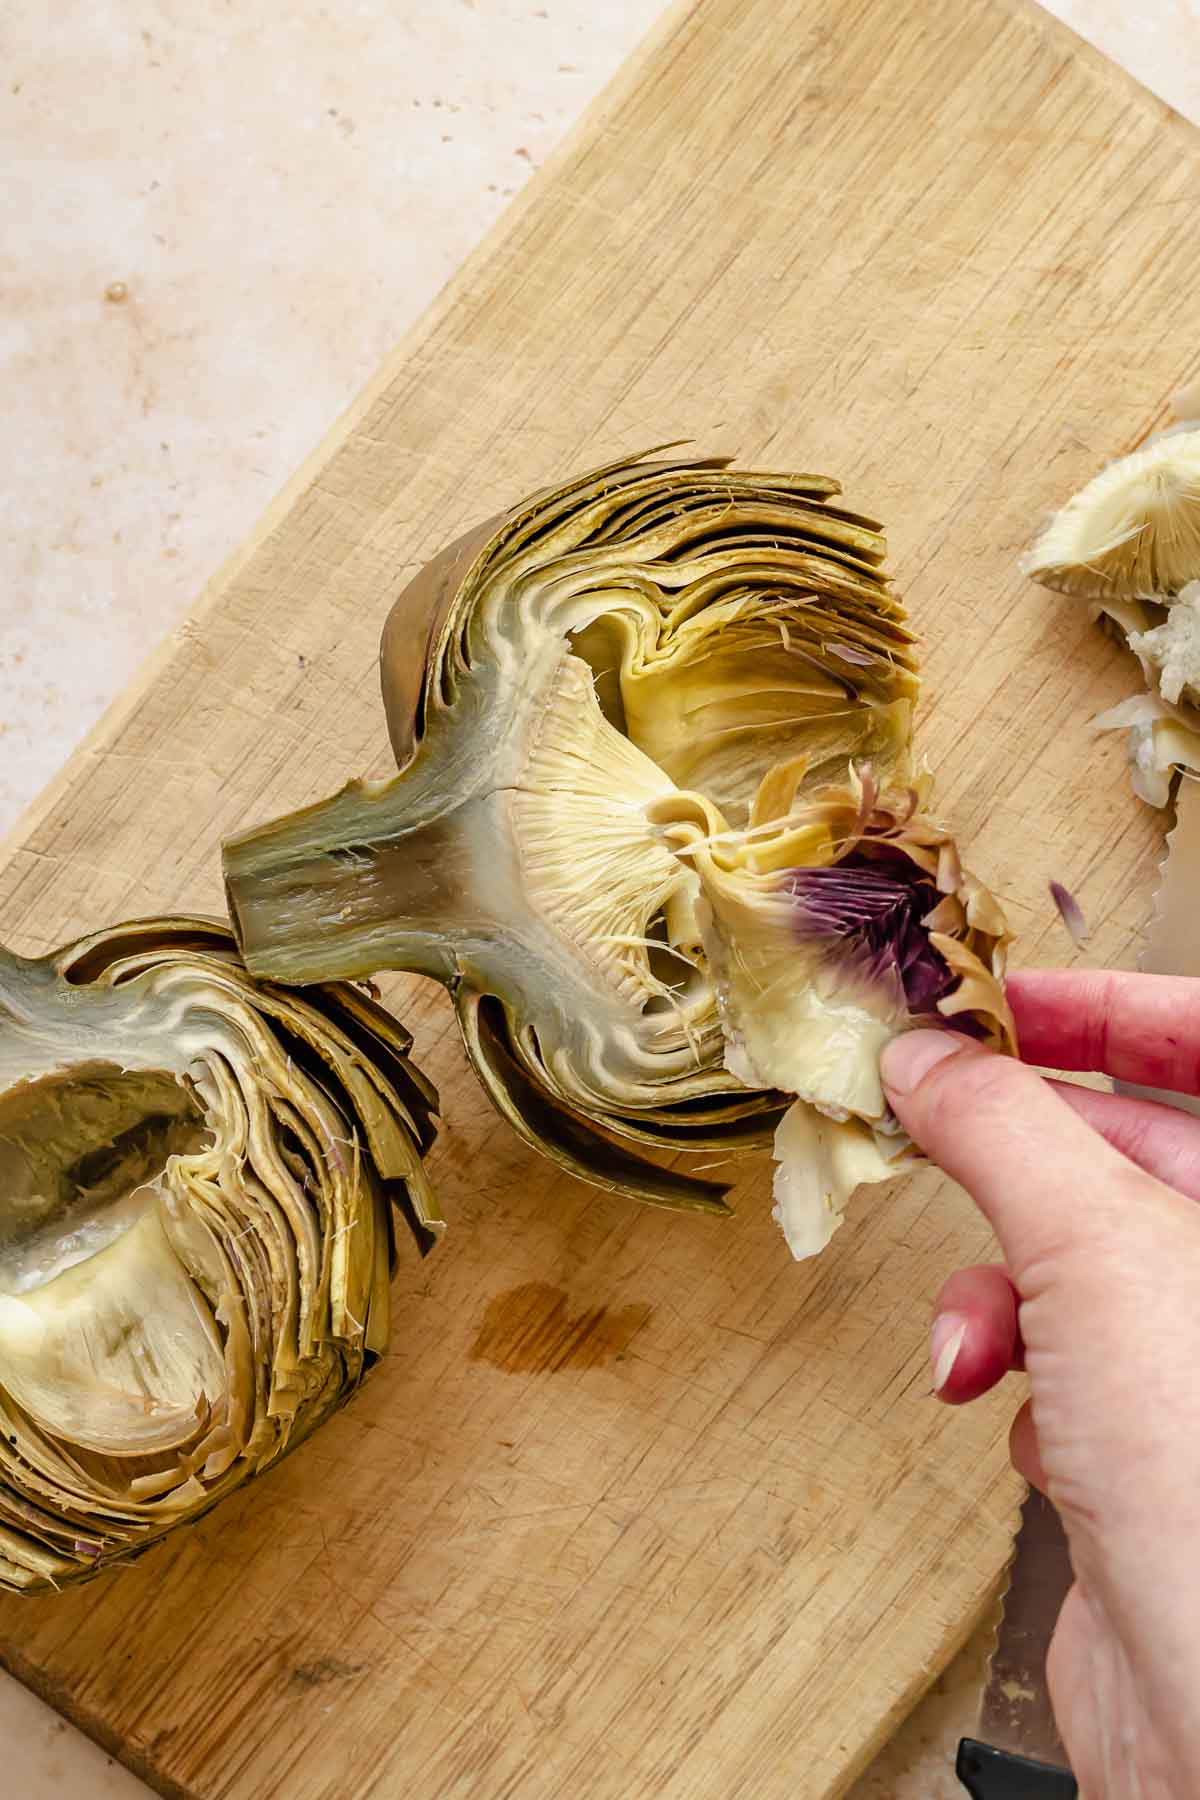 A hand removes the purple leaves from the inside of an artichoke.